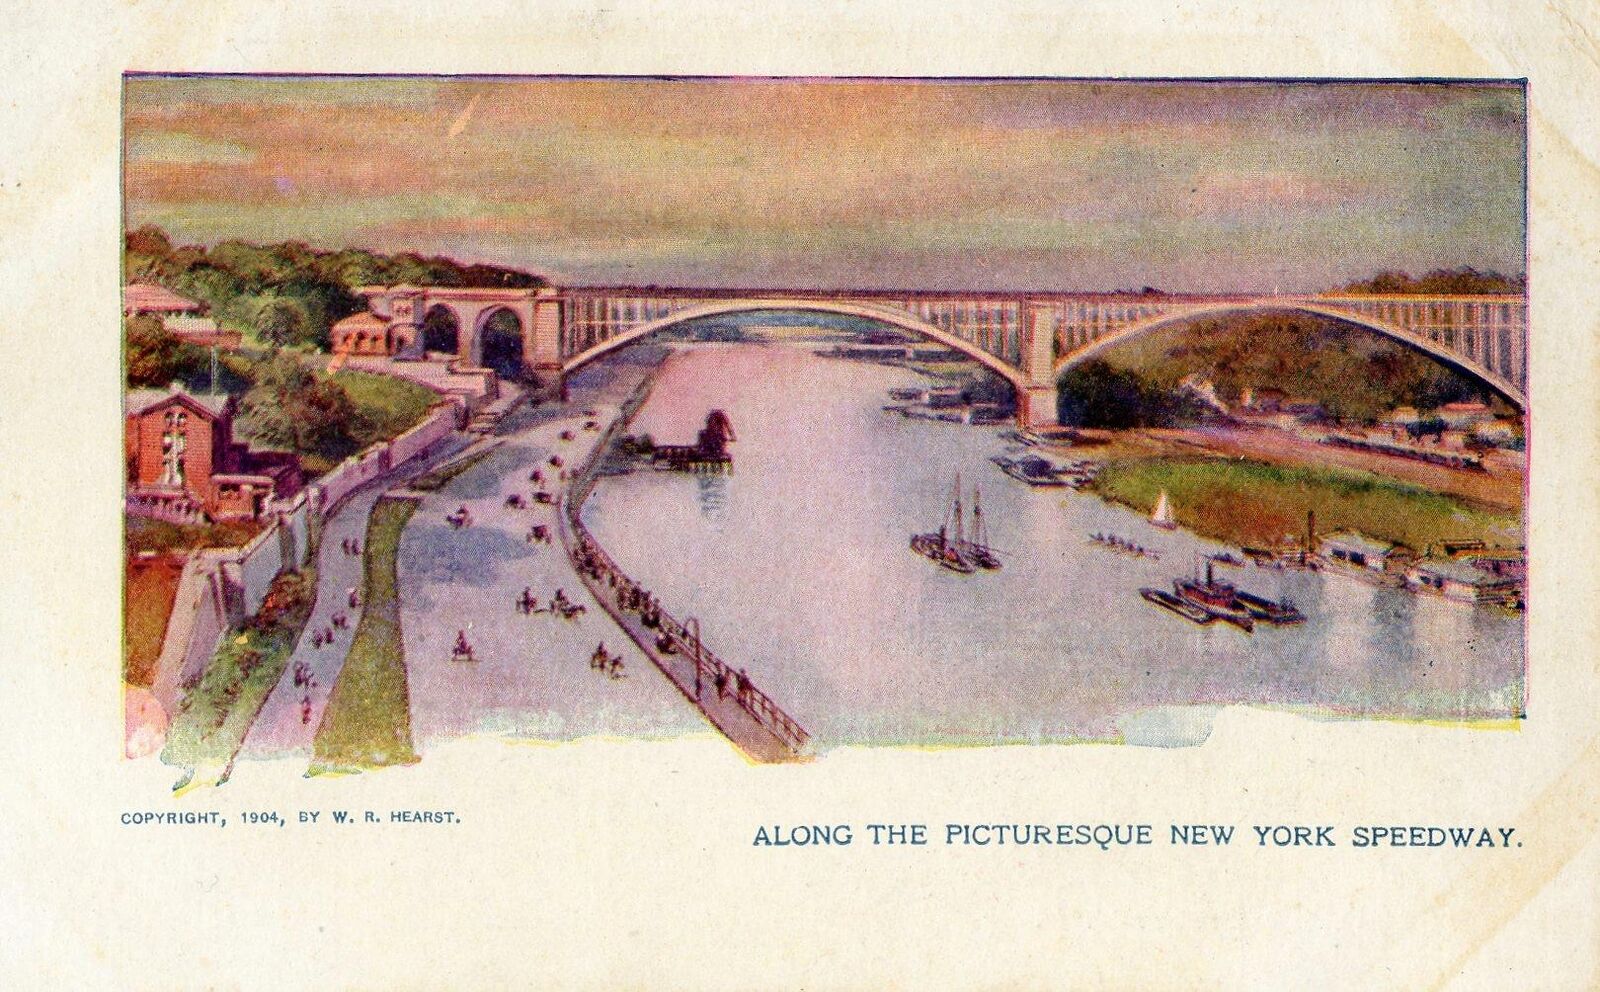 1904 ALONG THE PICTURESQUE NEW YORK SPEEDWAY*COPYRIGHT W R HEARST*POSTCARD